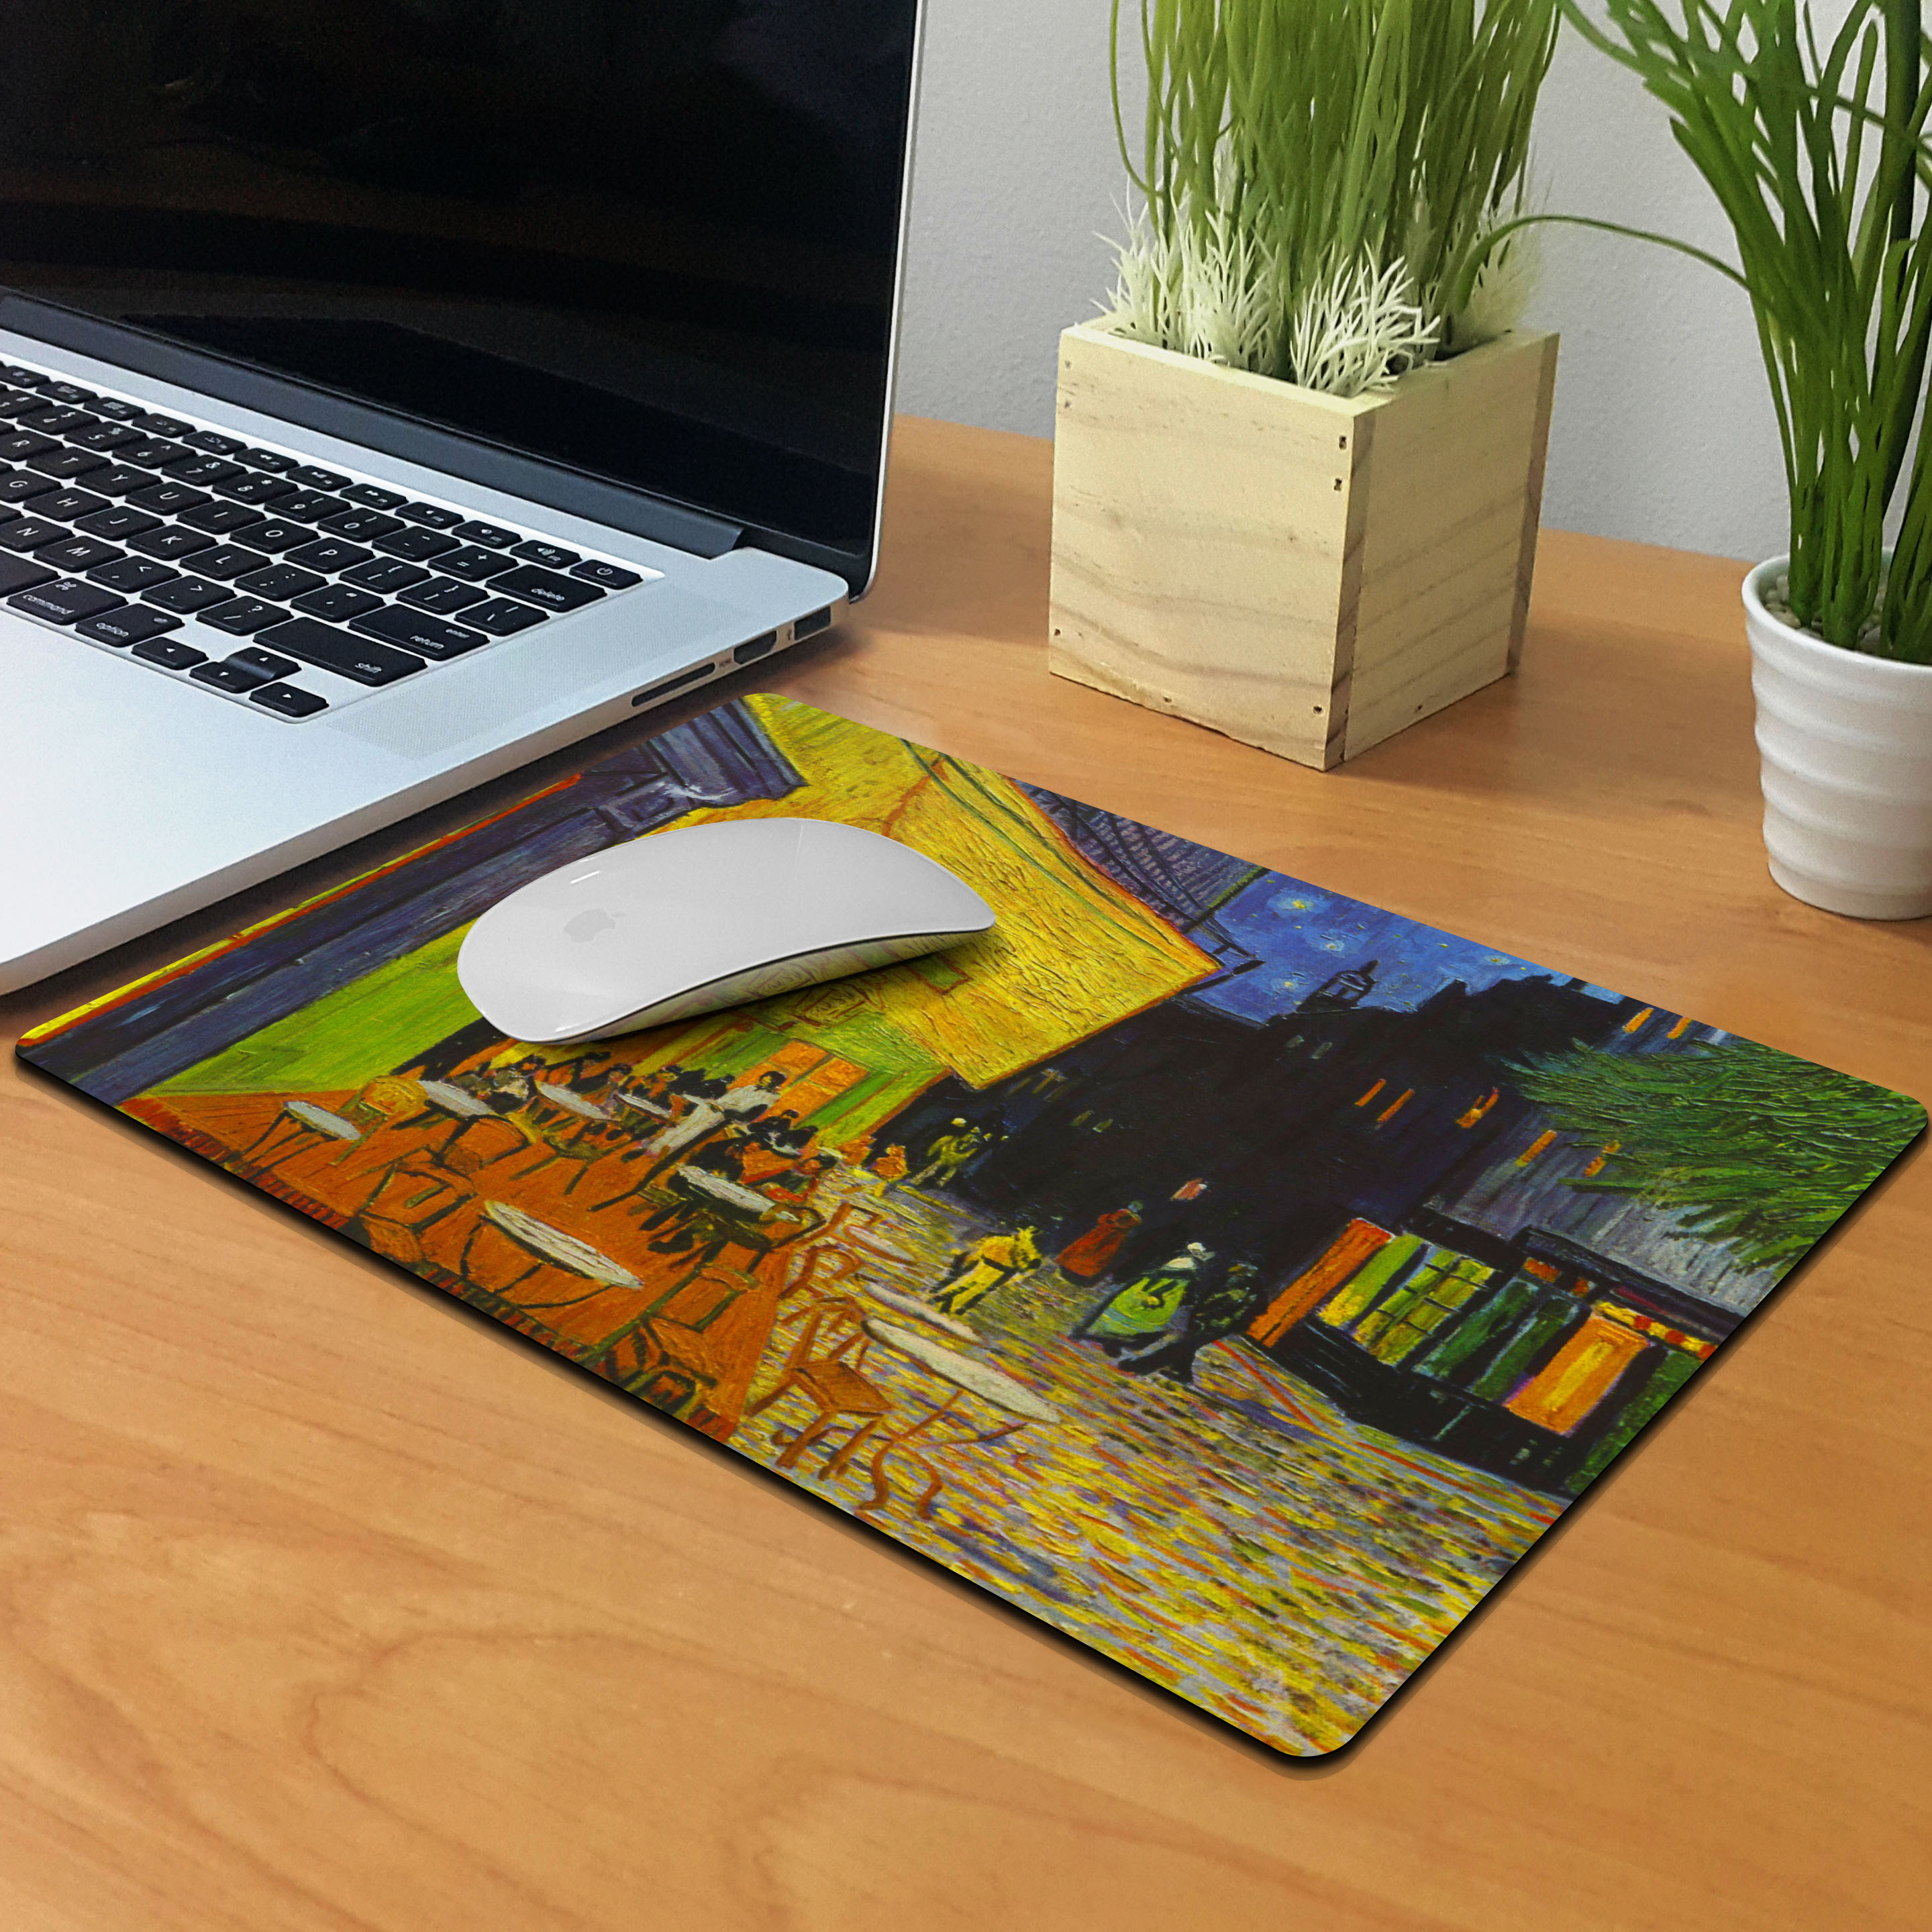 FINCIBO Super Size Rectangle Mouse Pad, Non-Slip X-Large Mouse Pad for Home, Office, and Gaming Desk, Cafe Terrace At Night Van Gogh - image 4 of 5